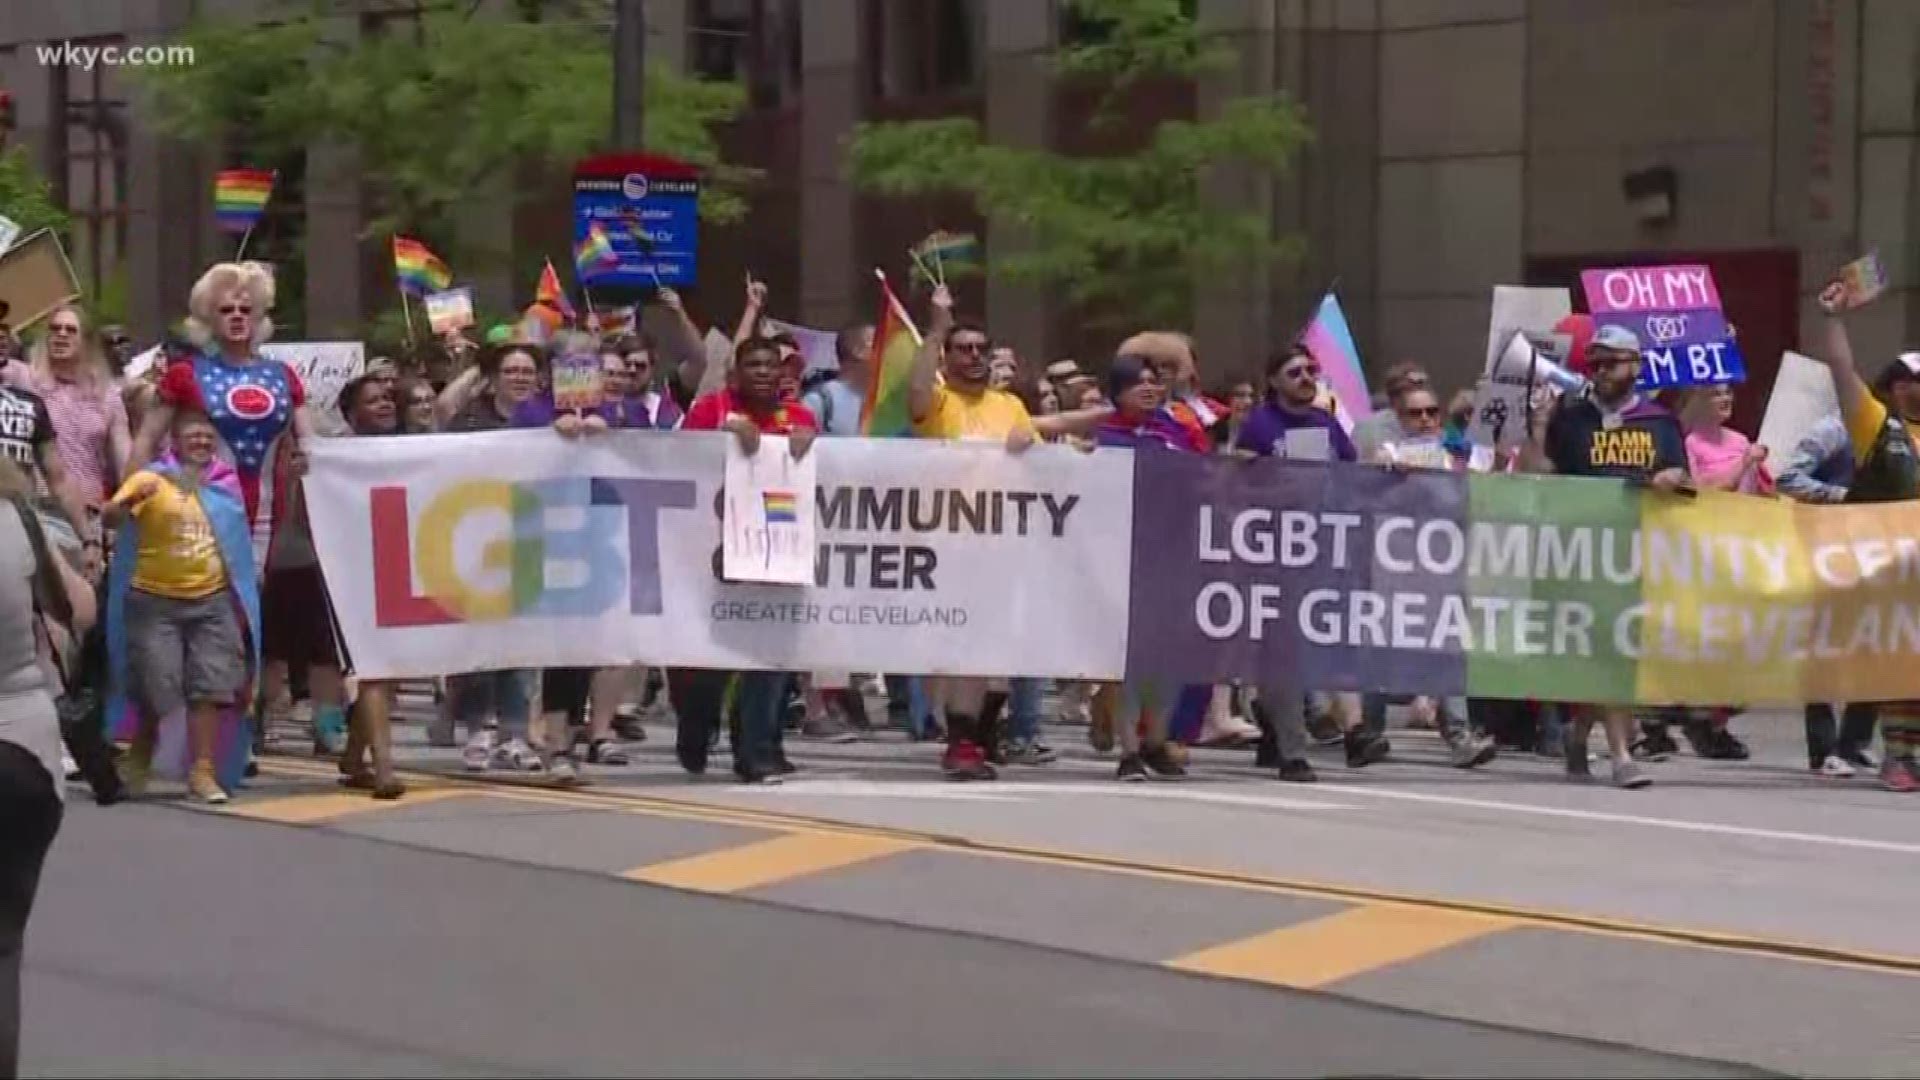 Pride in the CLE March and Festival is described as "a dynamic, inclusive event for people of all ages and it is made possible with the support of the community." WKYC's Michael Estime emceed the event.